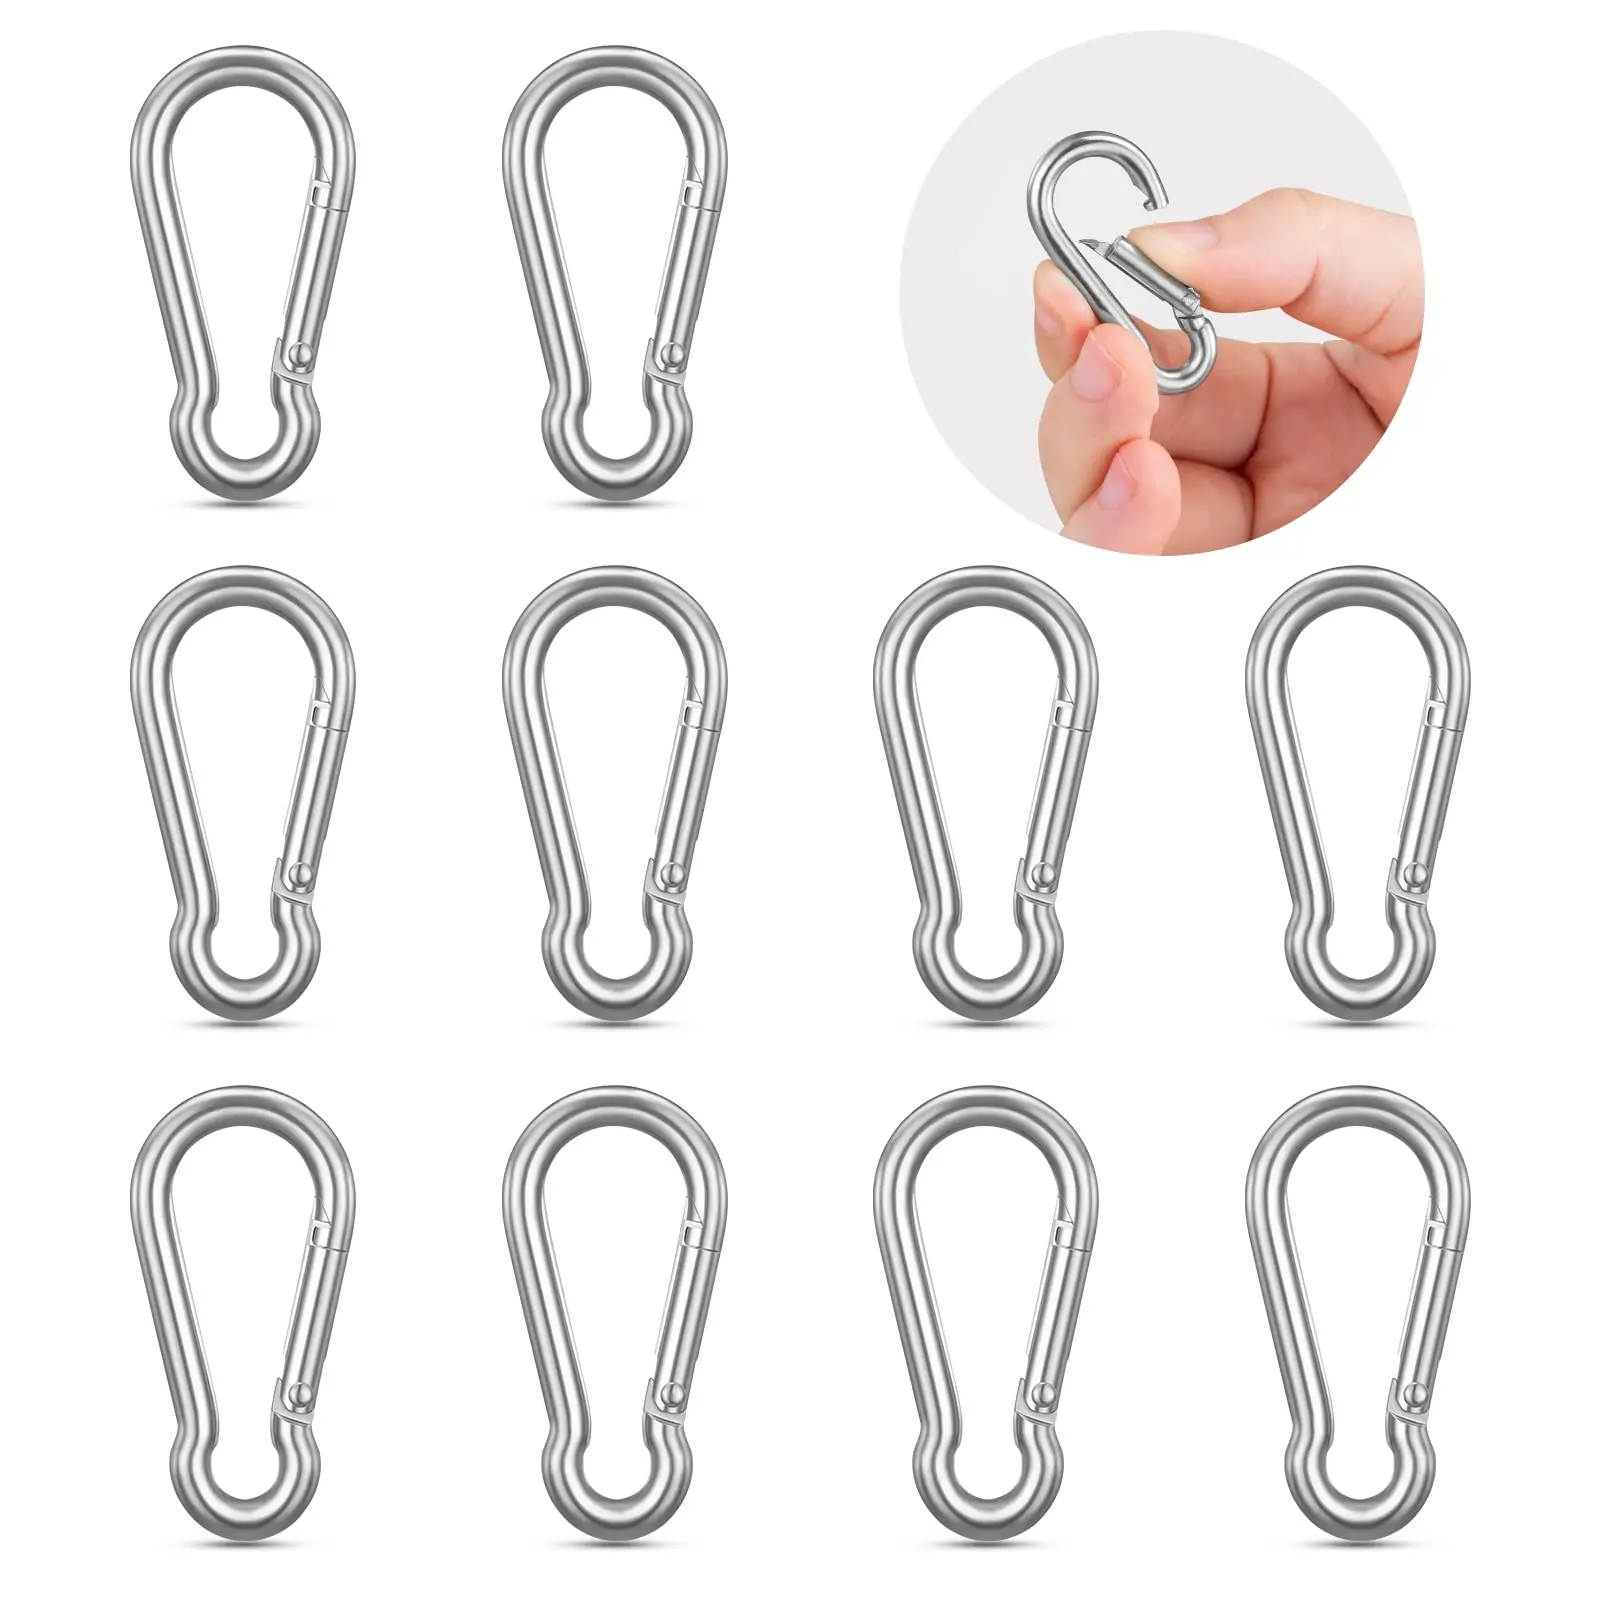 10PCS Stainless Steel Carabiners Clips 1.57 Inch Small Caribeaner Spring  Snap Hooks Heavy Duty Keychain Clip Qick Link for Keys - AliExpress